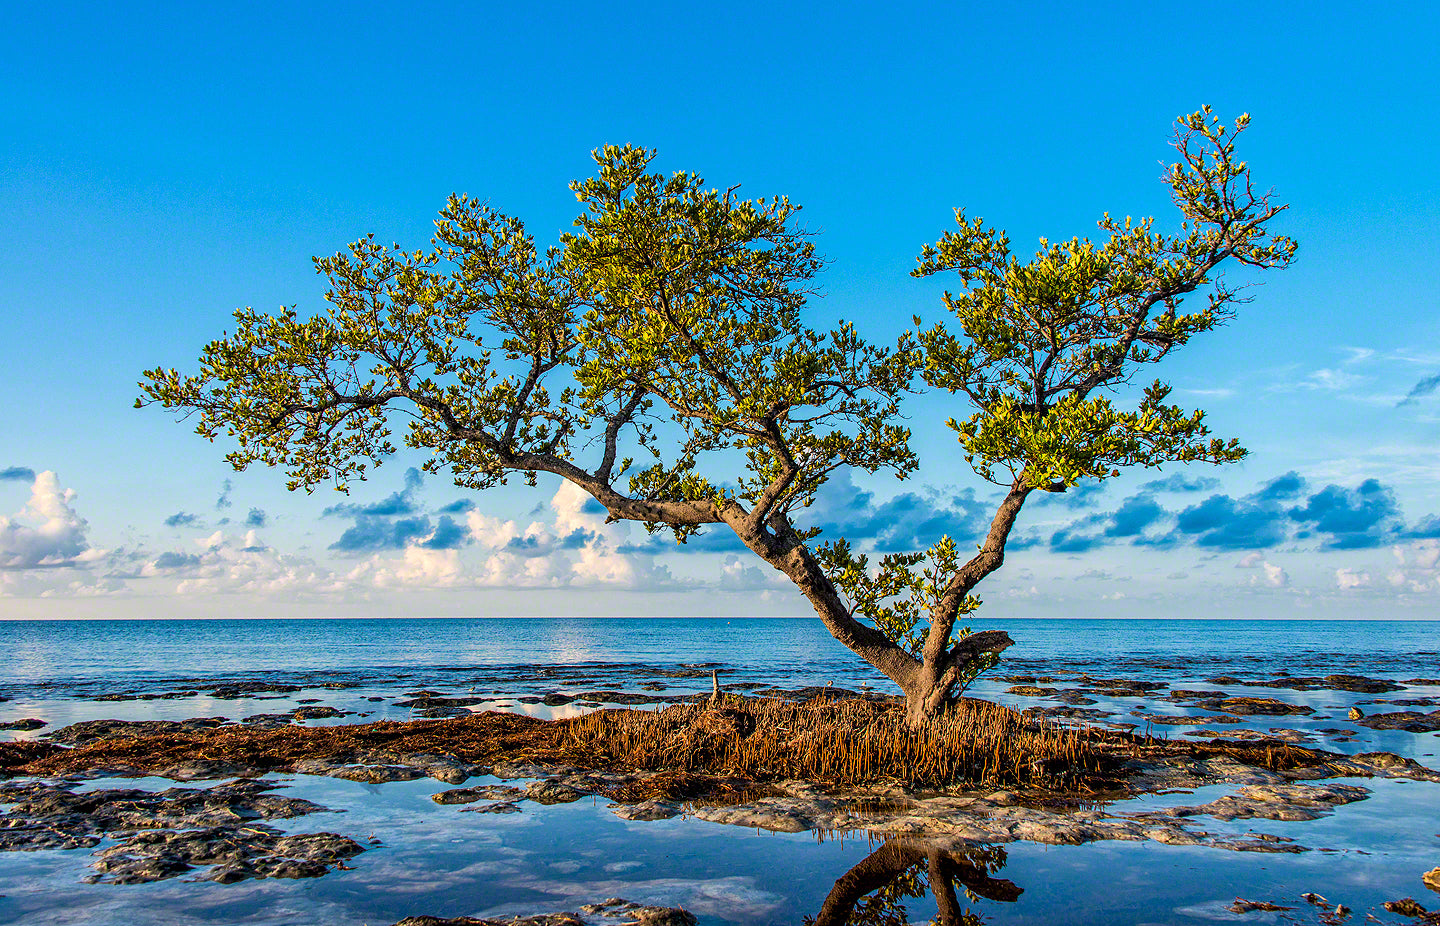 A photo of a lone Black Mangrove Tree on the edge of the ocean in Spanish Harbor, Key